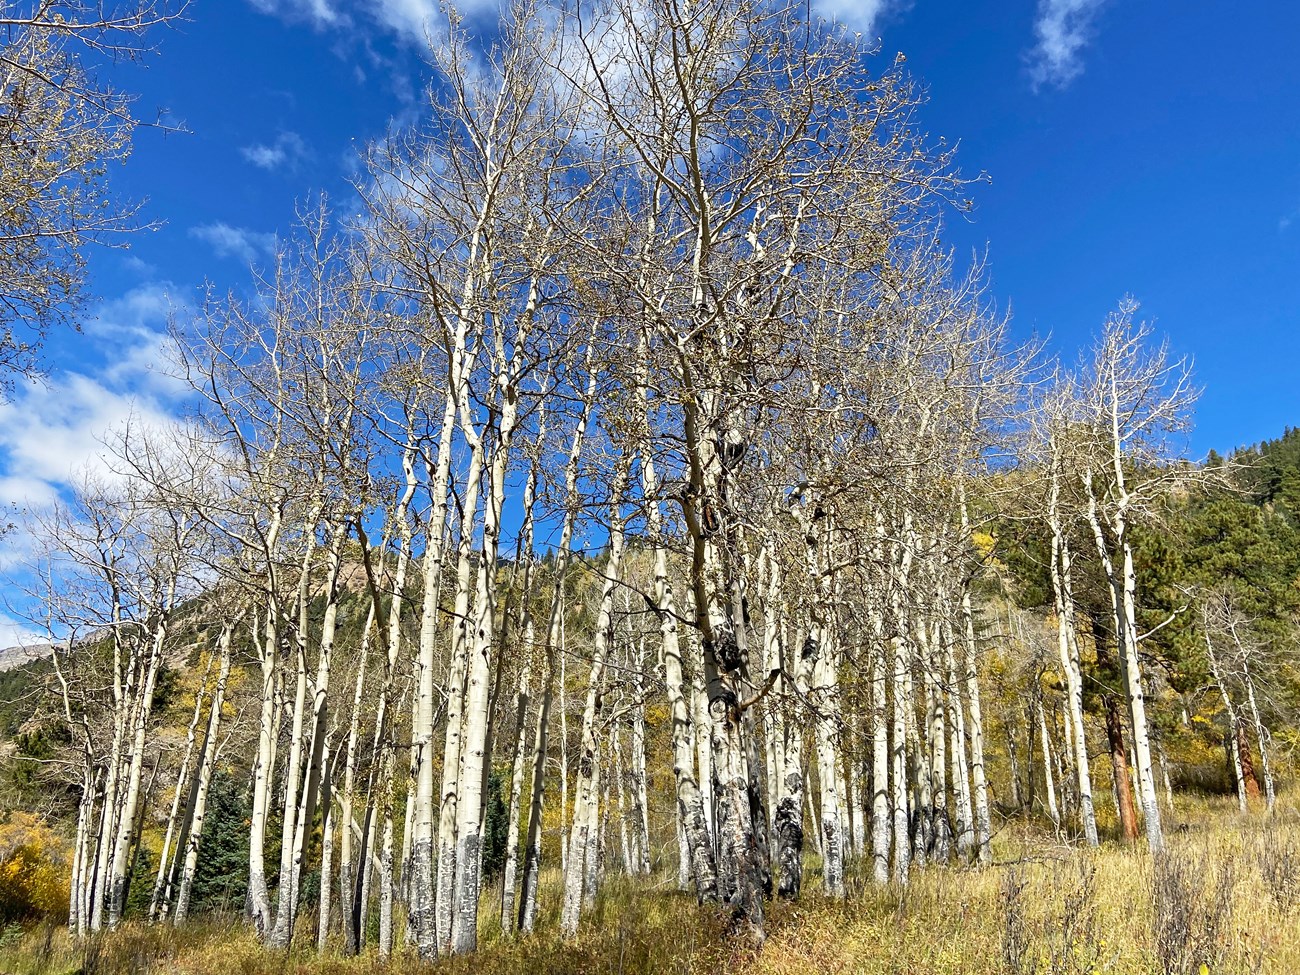 A grove of aspen trees are seen in fall, their leaves have fallen in preparation for winter.